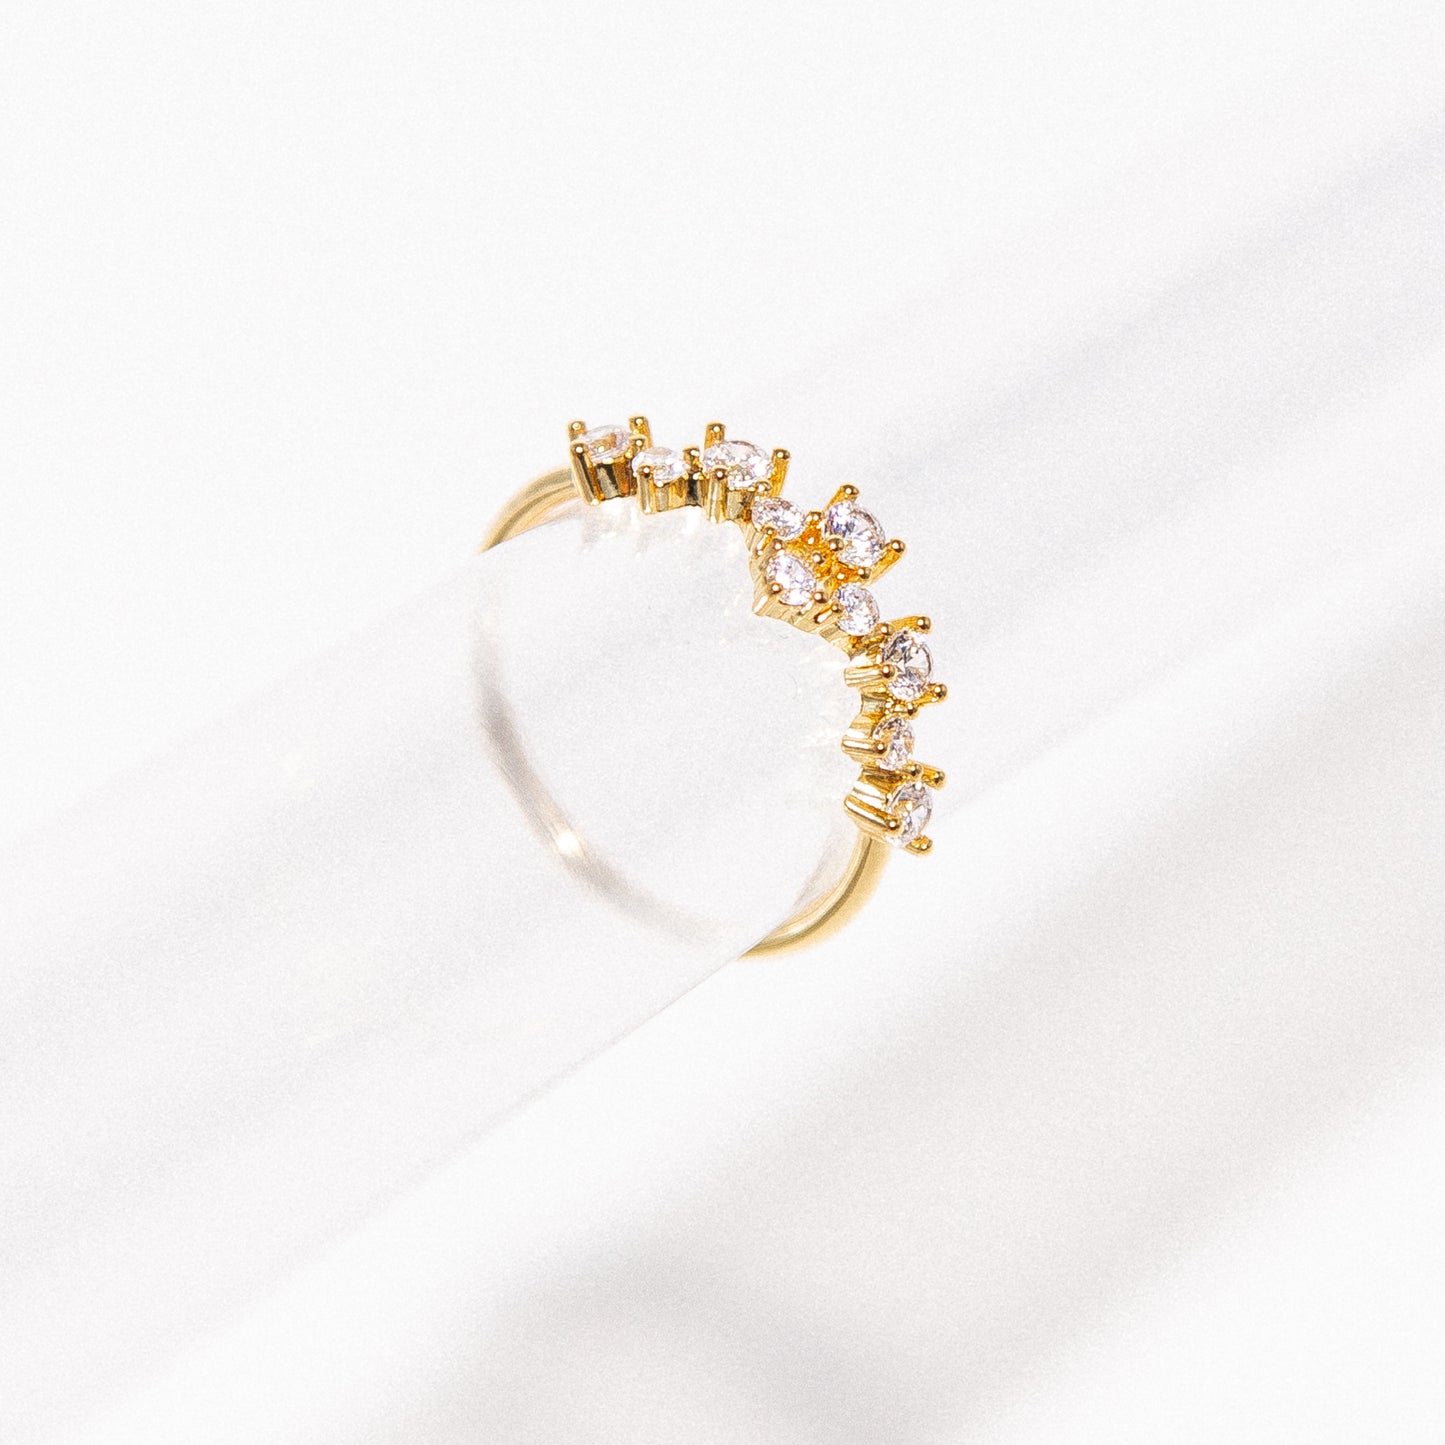 Droplet Ring